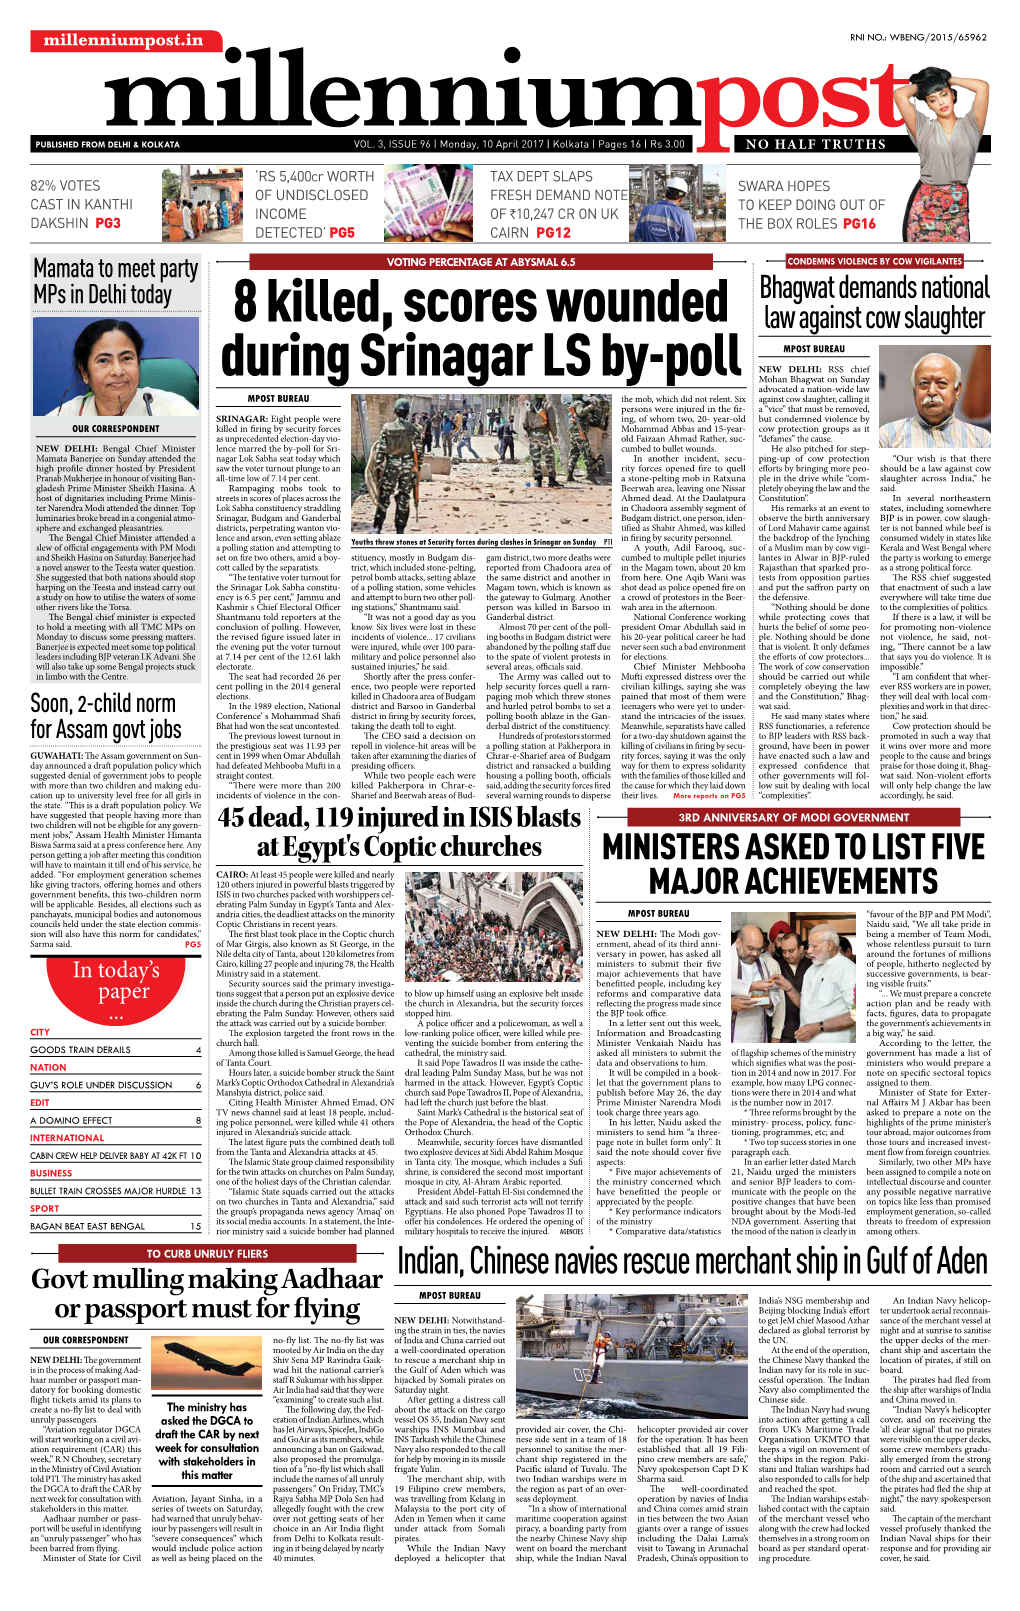 8 Killed, Scores Wounded During Srinagar LS By-Poll